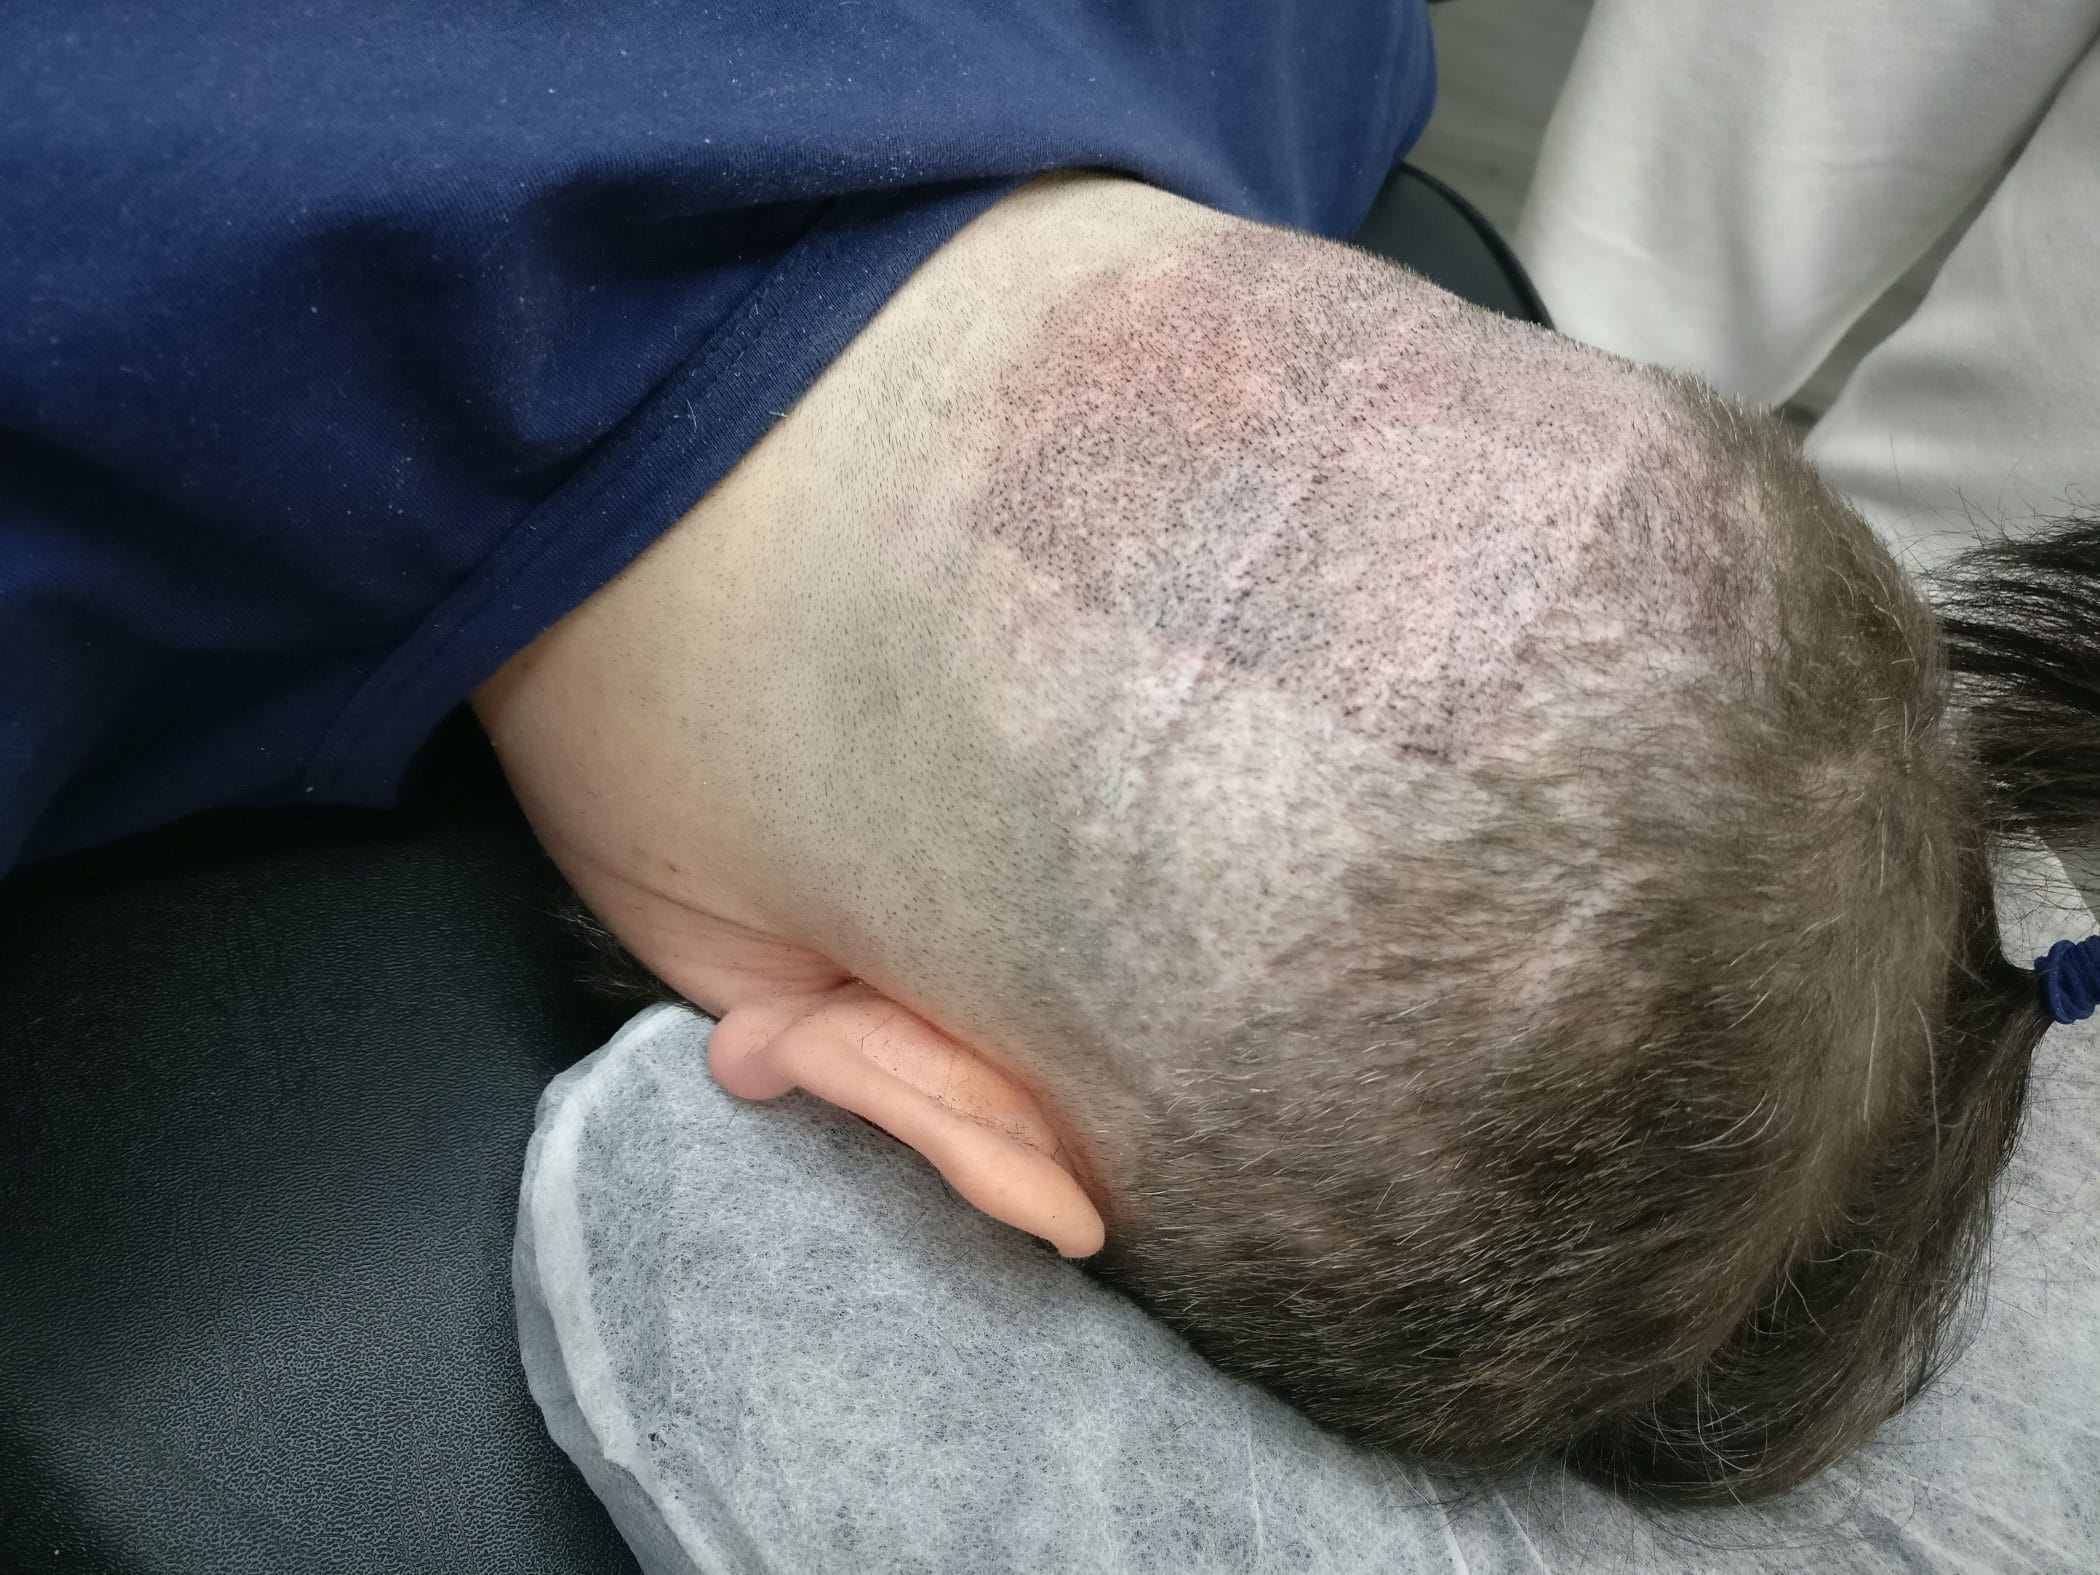 Is a hair transplant possible after getting scalp micropigmentation?